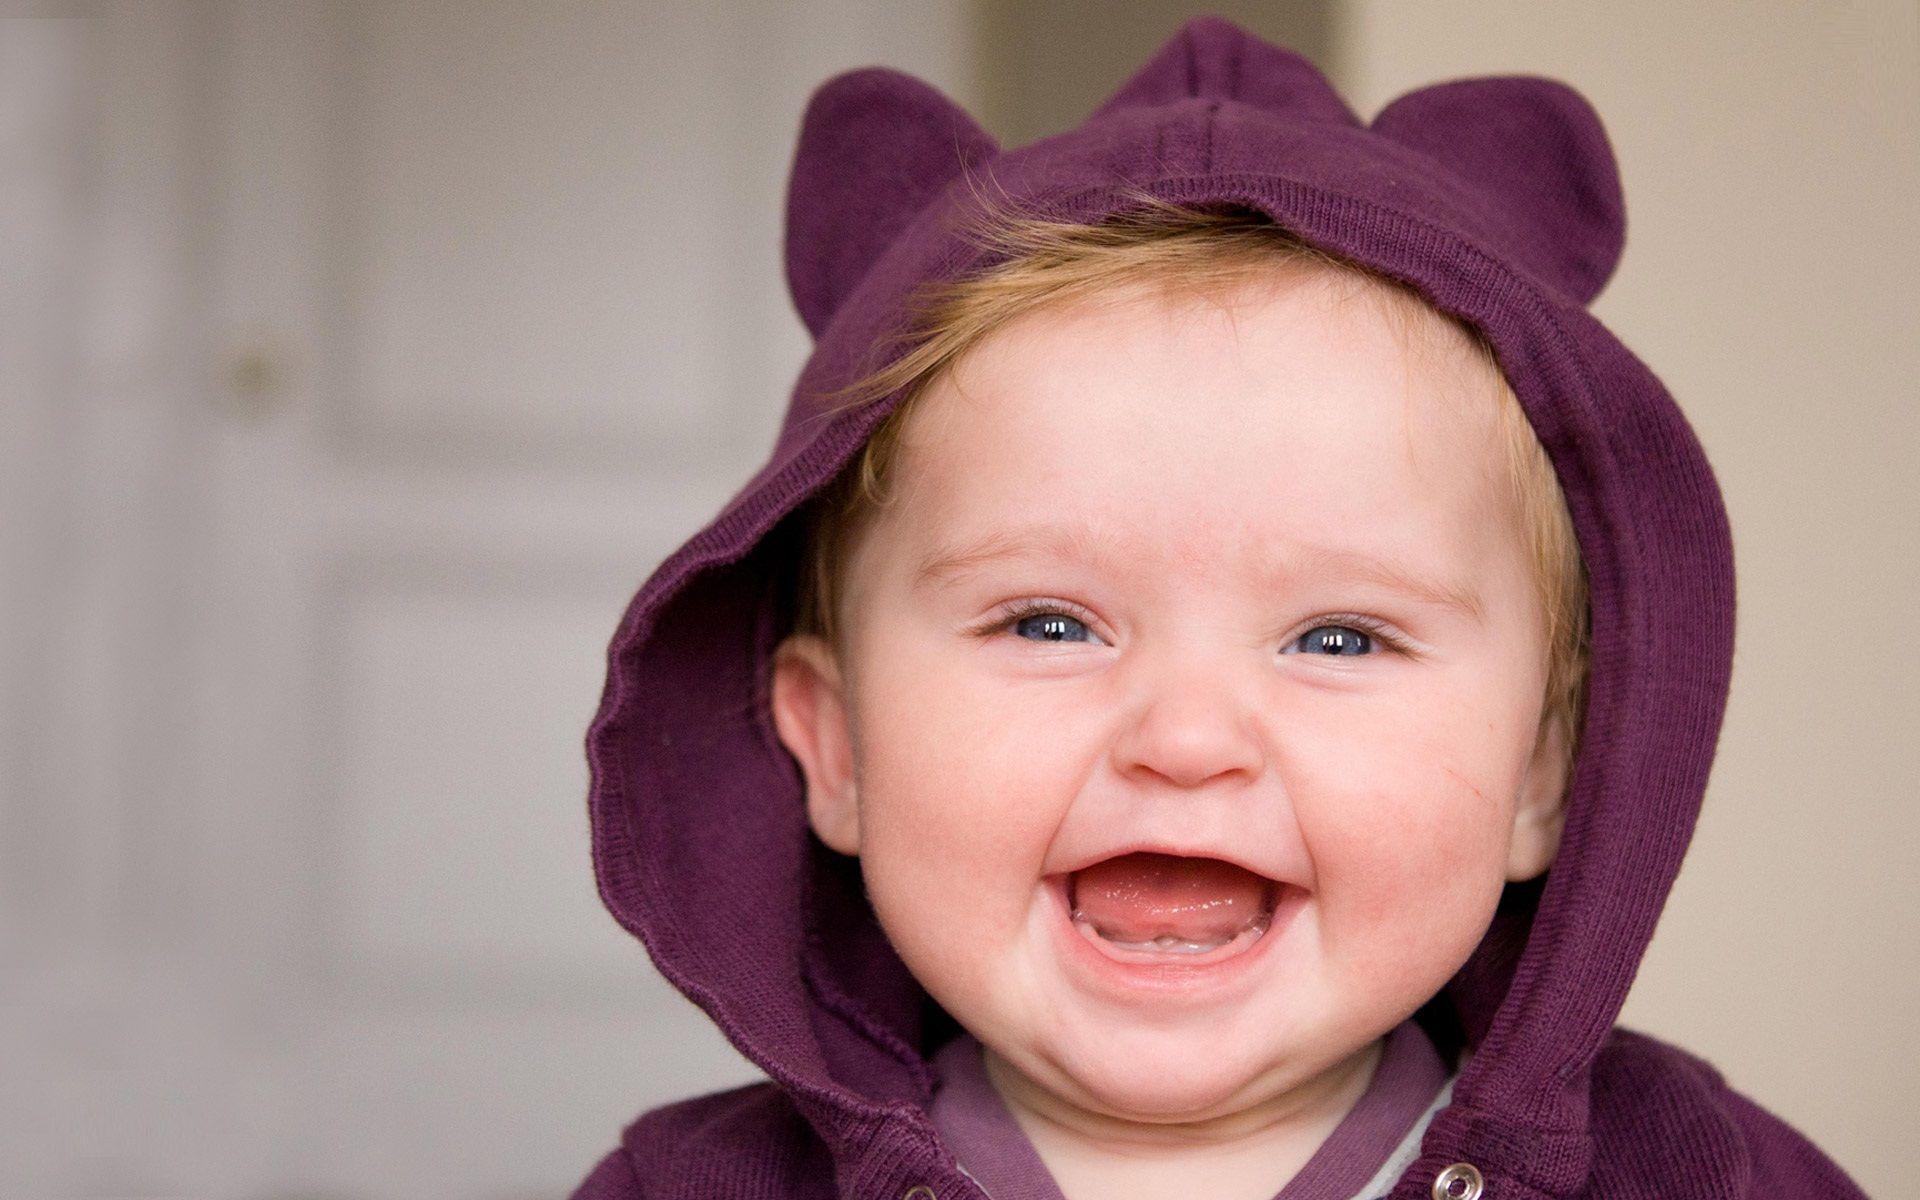 Amazing Smile Cute Baby Hd Free Wallpaper